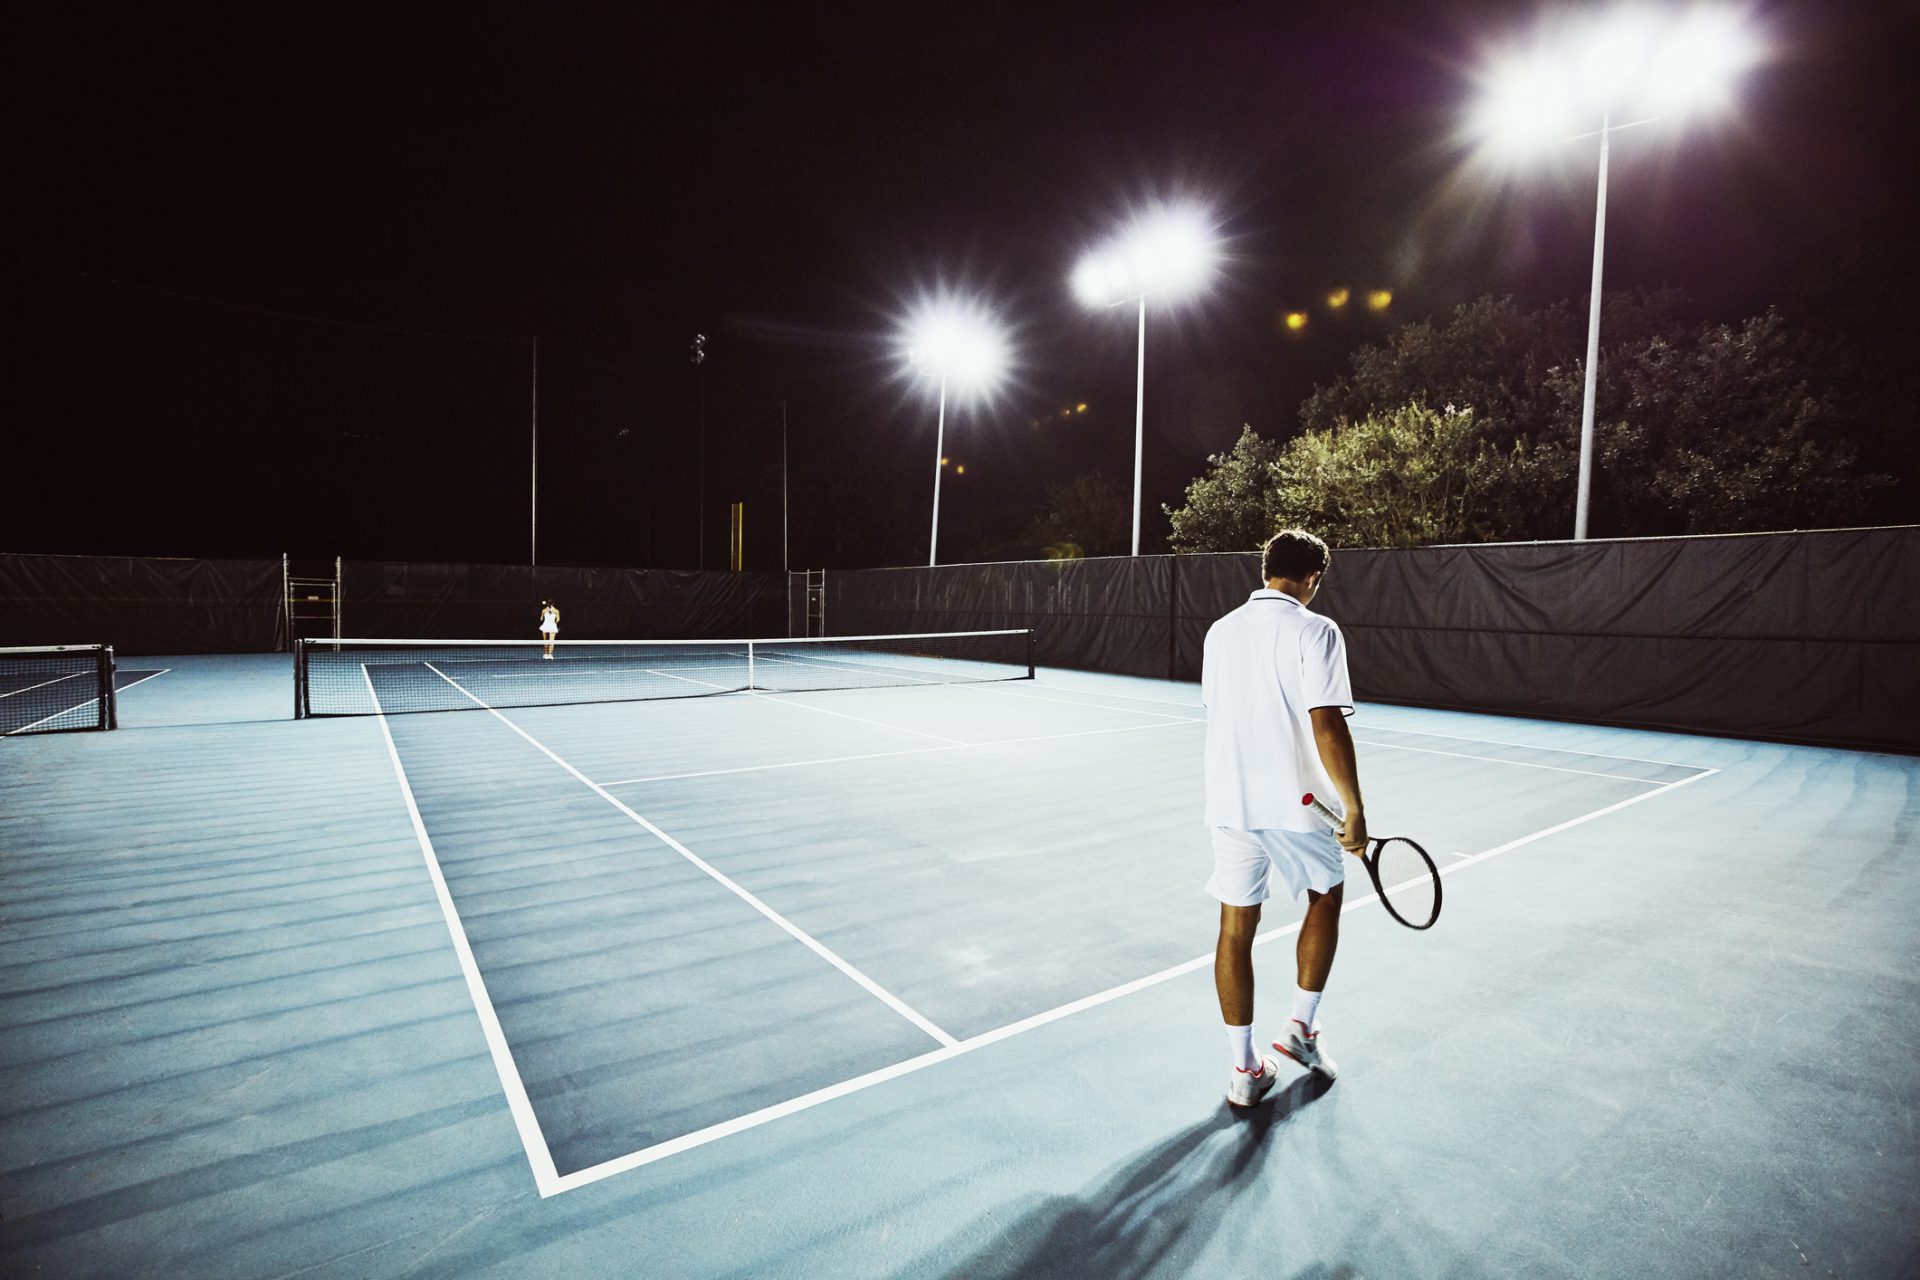 Tennis teammates practicing together on outdoor court at night